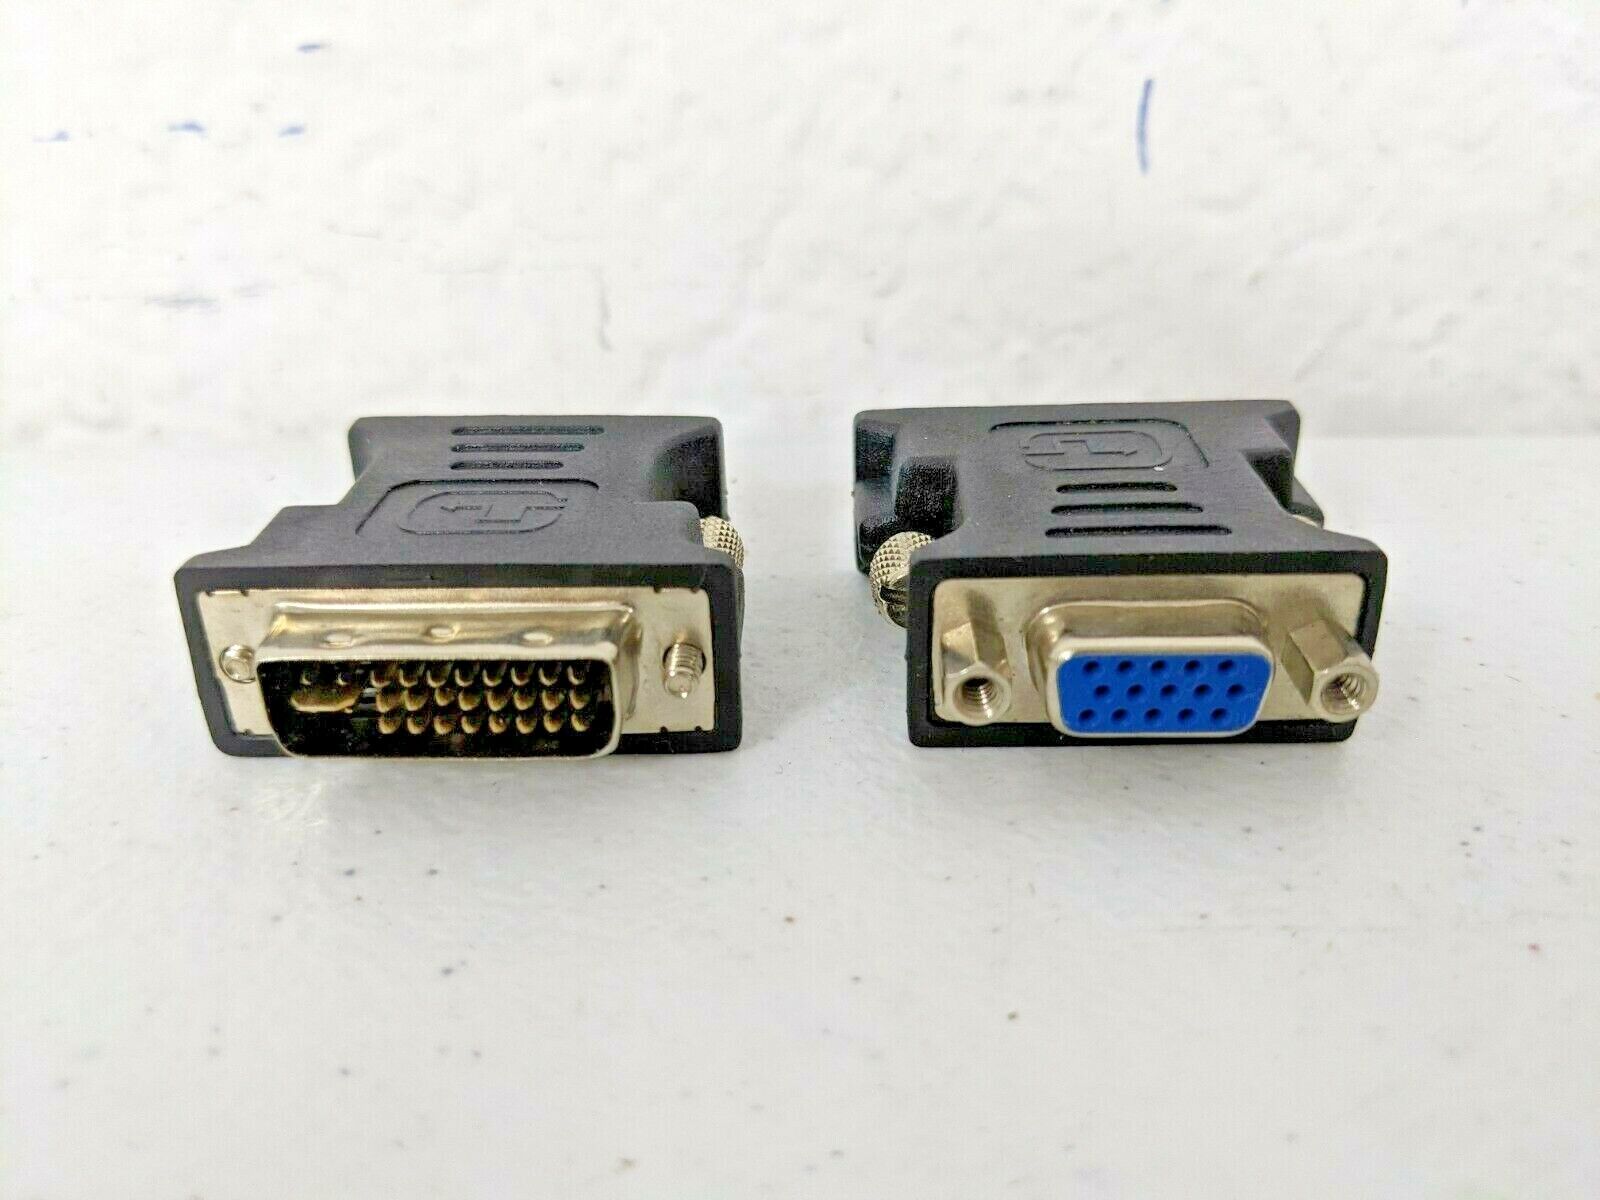 VGA Female to DVI-I (Dual Link) Male Adapter 2-Pack - NEW, US SELLER